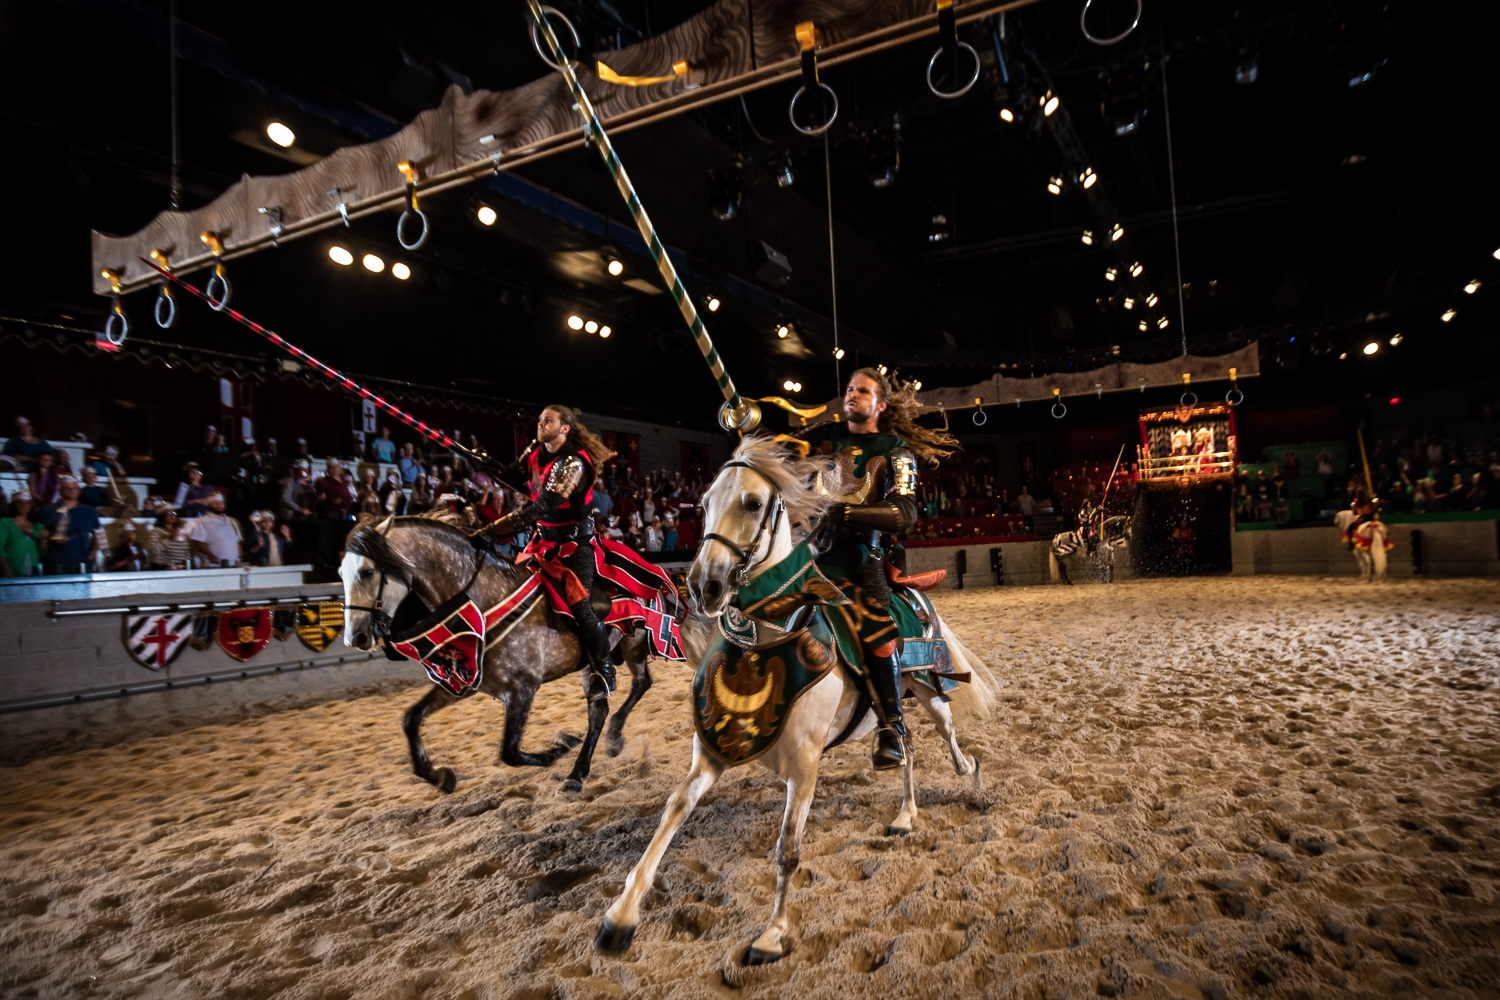 medieval times dinner & tournament groupon